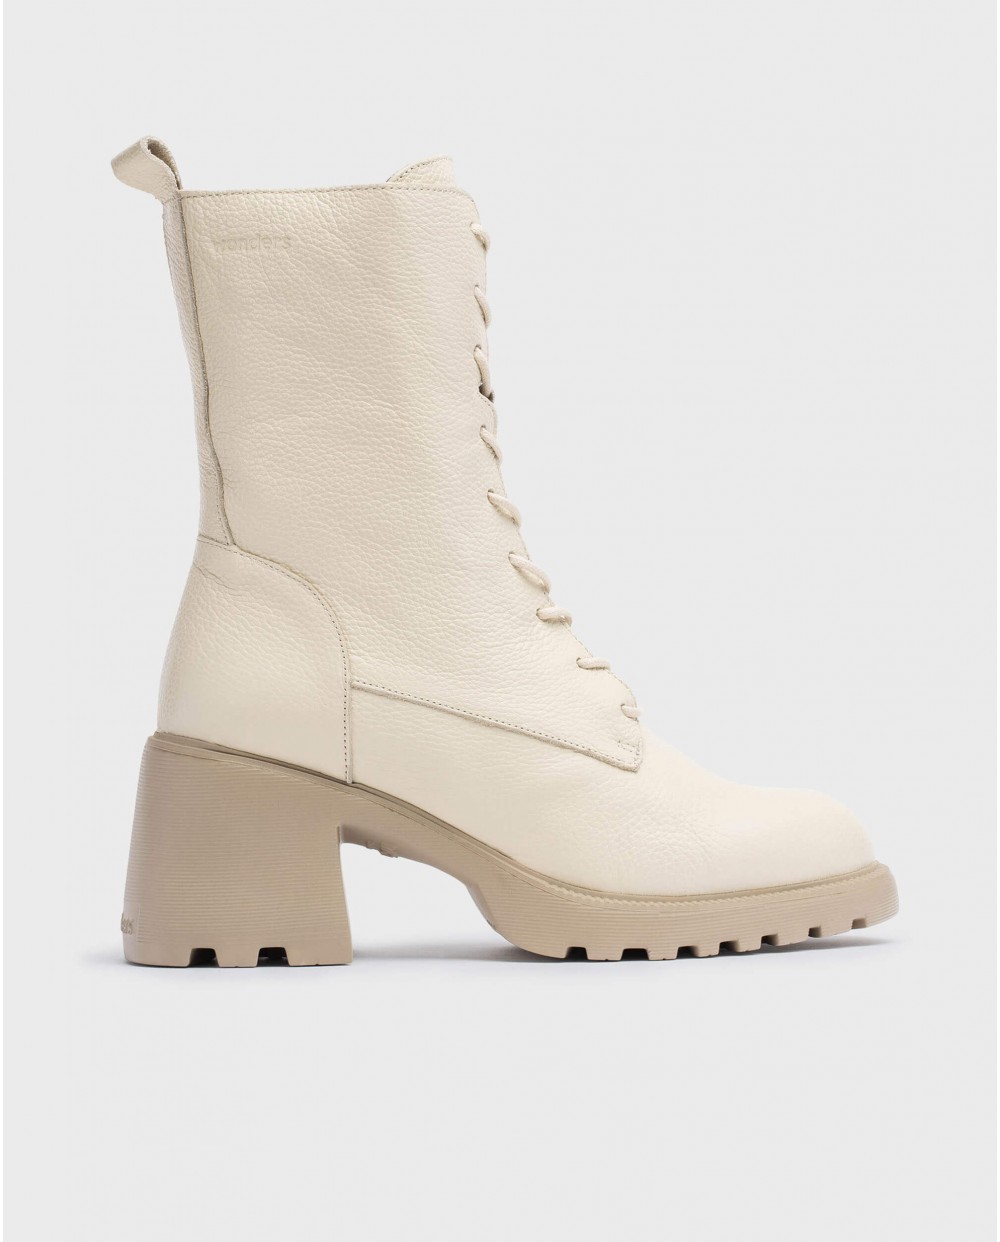 Wonders-Ankle Boots-Cream GIGI ankle boot